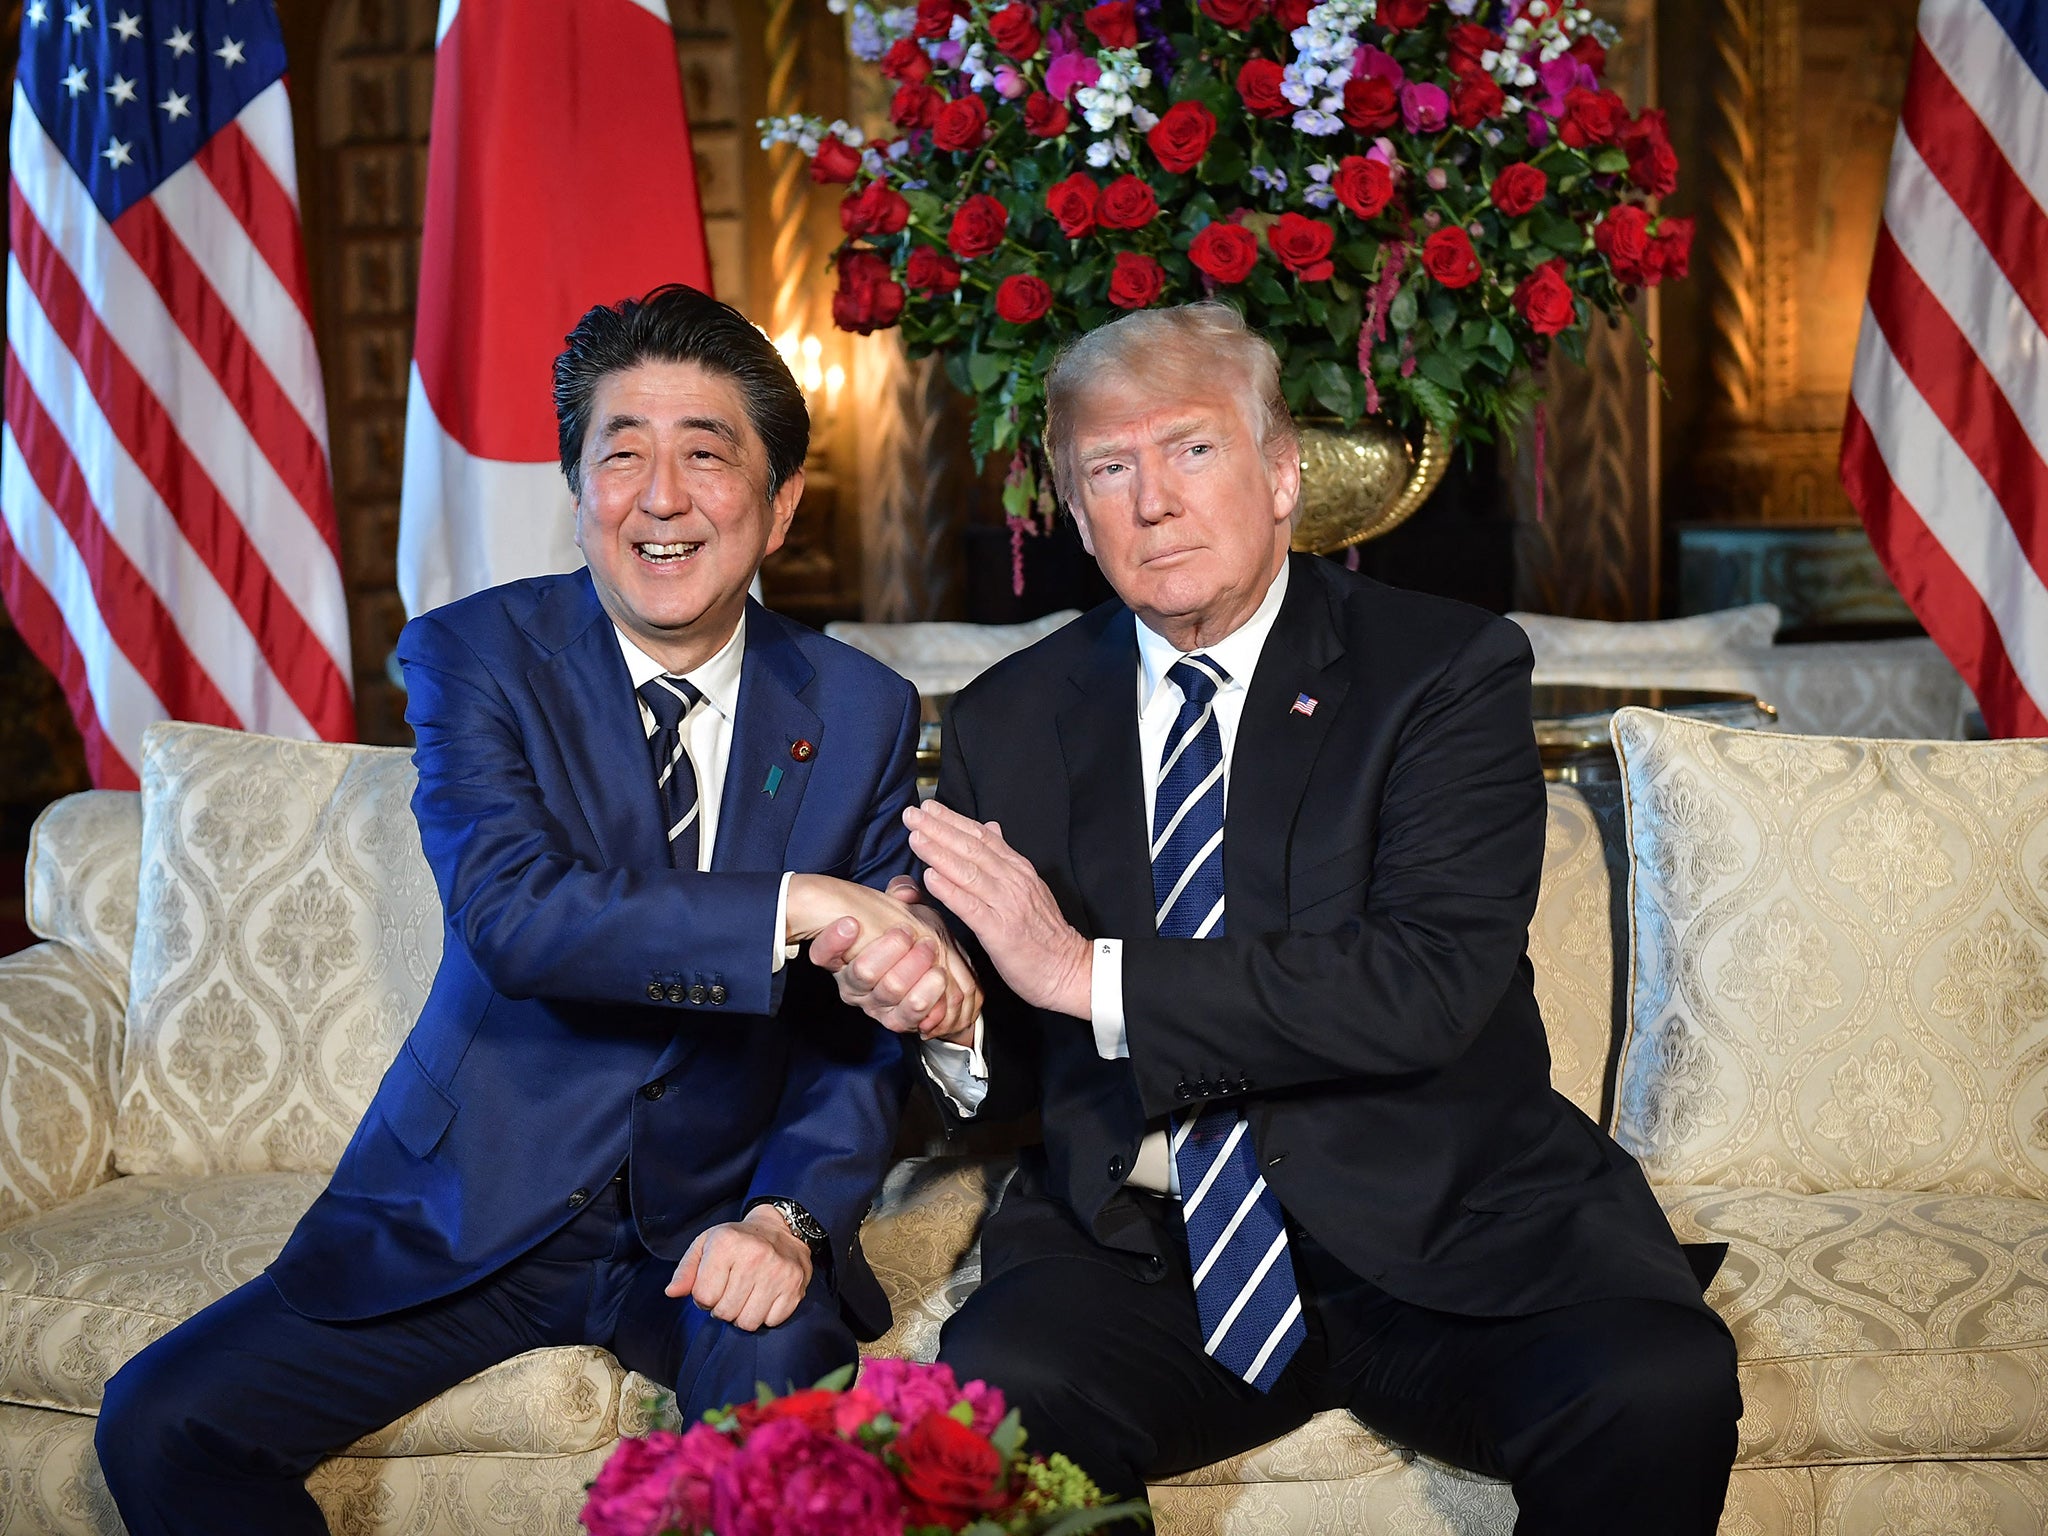 US president Donald Trump greets Abe as he arrives for talks in Palm Beach, Florida, in 2018